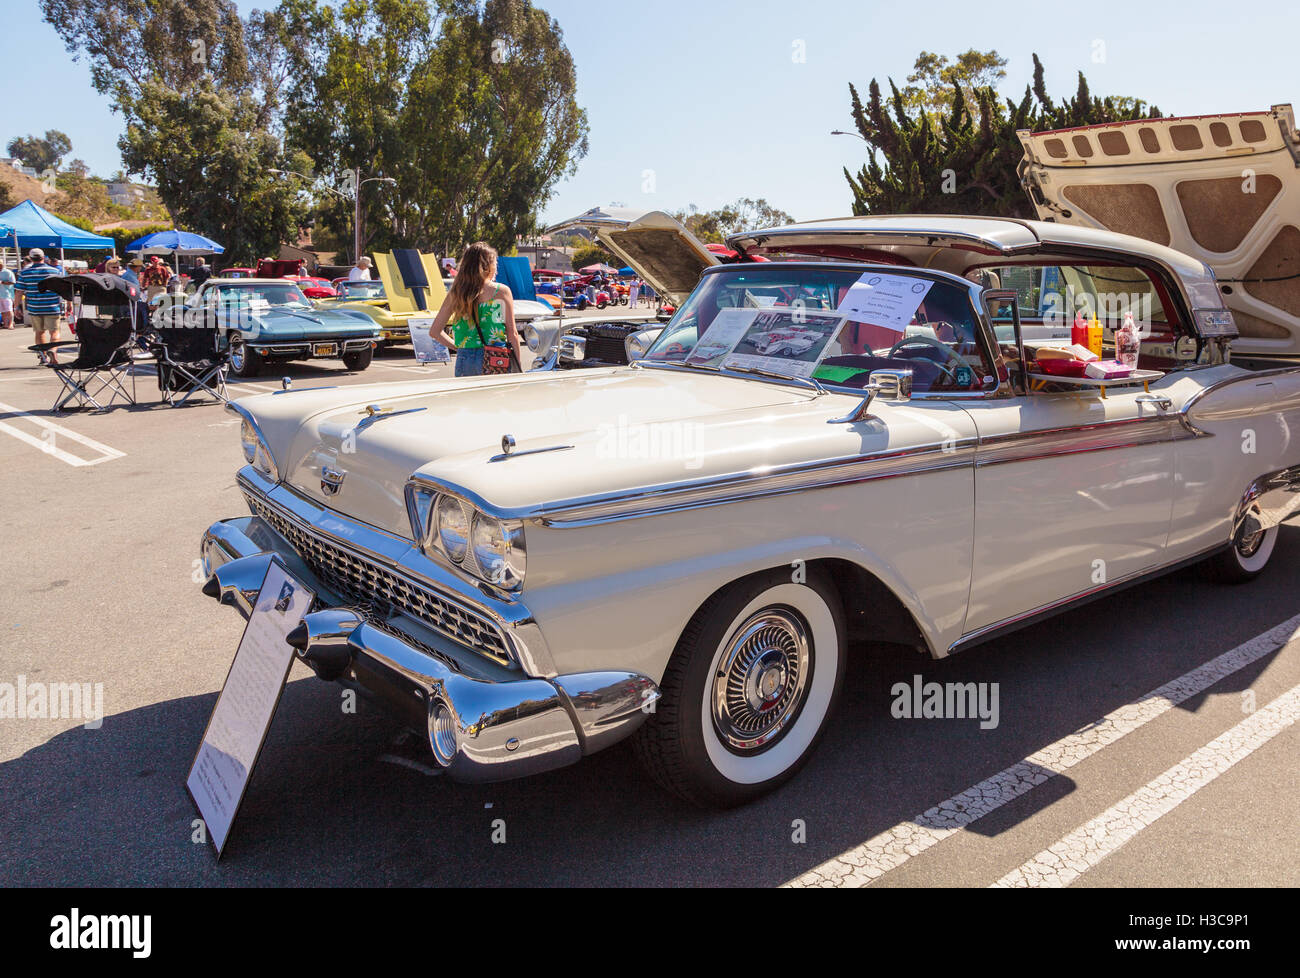 Laguna Beach, CA, USA - October 2, 2016: White 1959 Ford Galaxie owned by Wayne Mac Cartney and displayed at the Rotary Club of Stock Photo